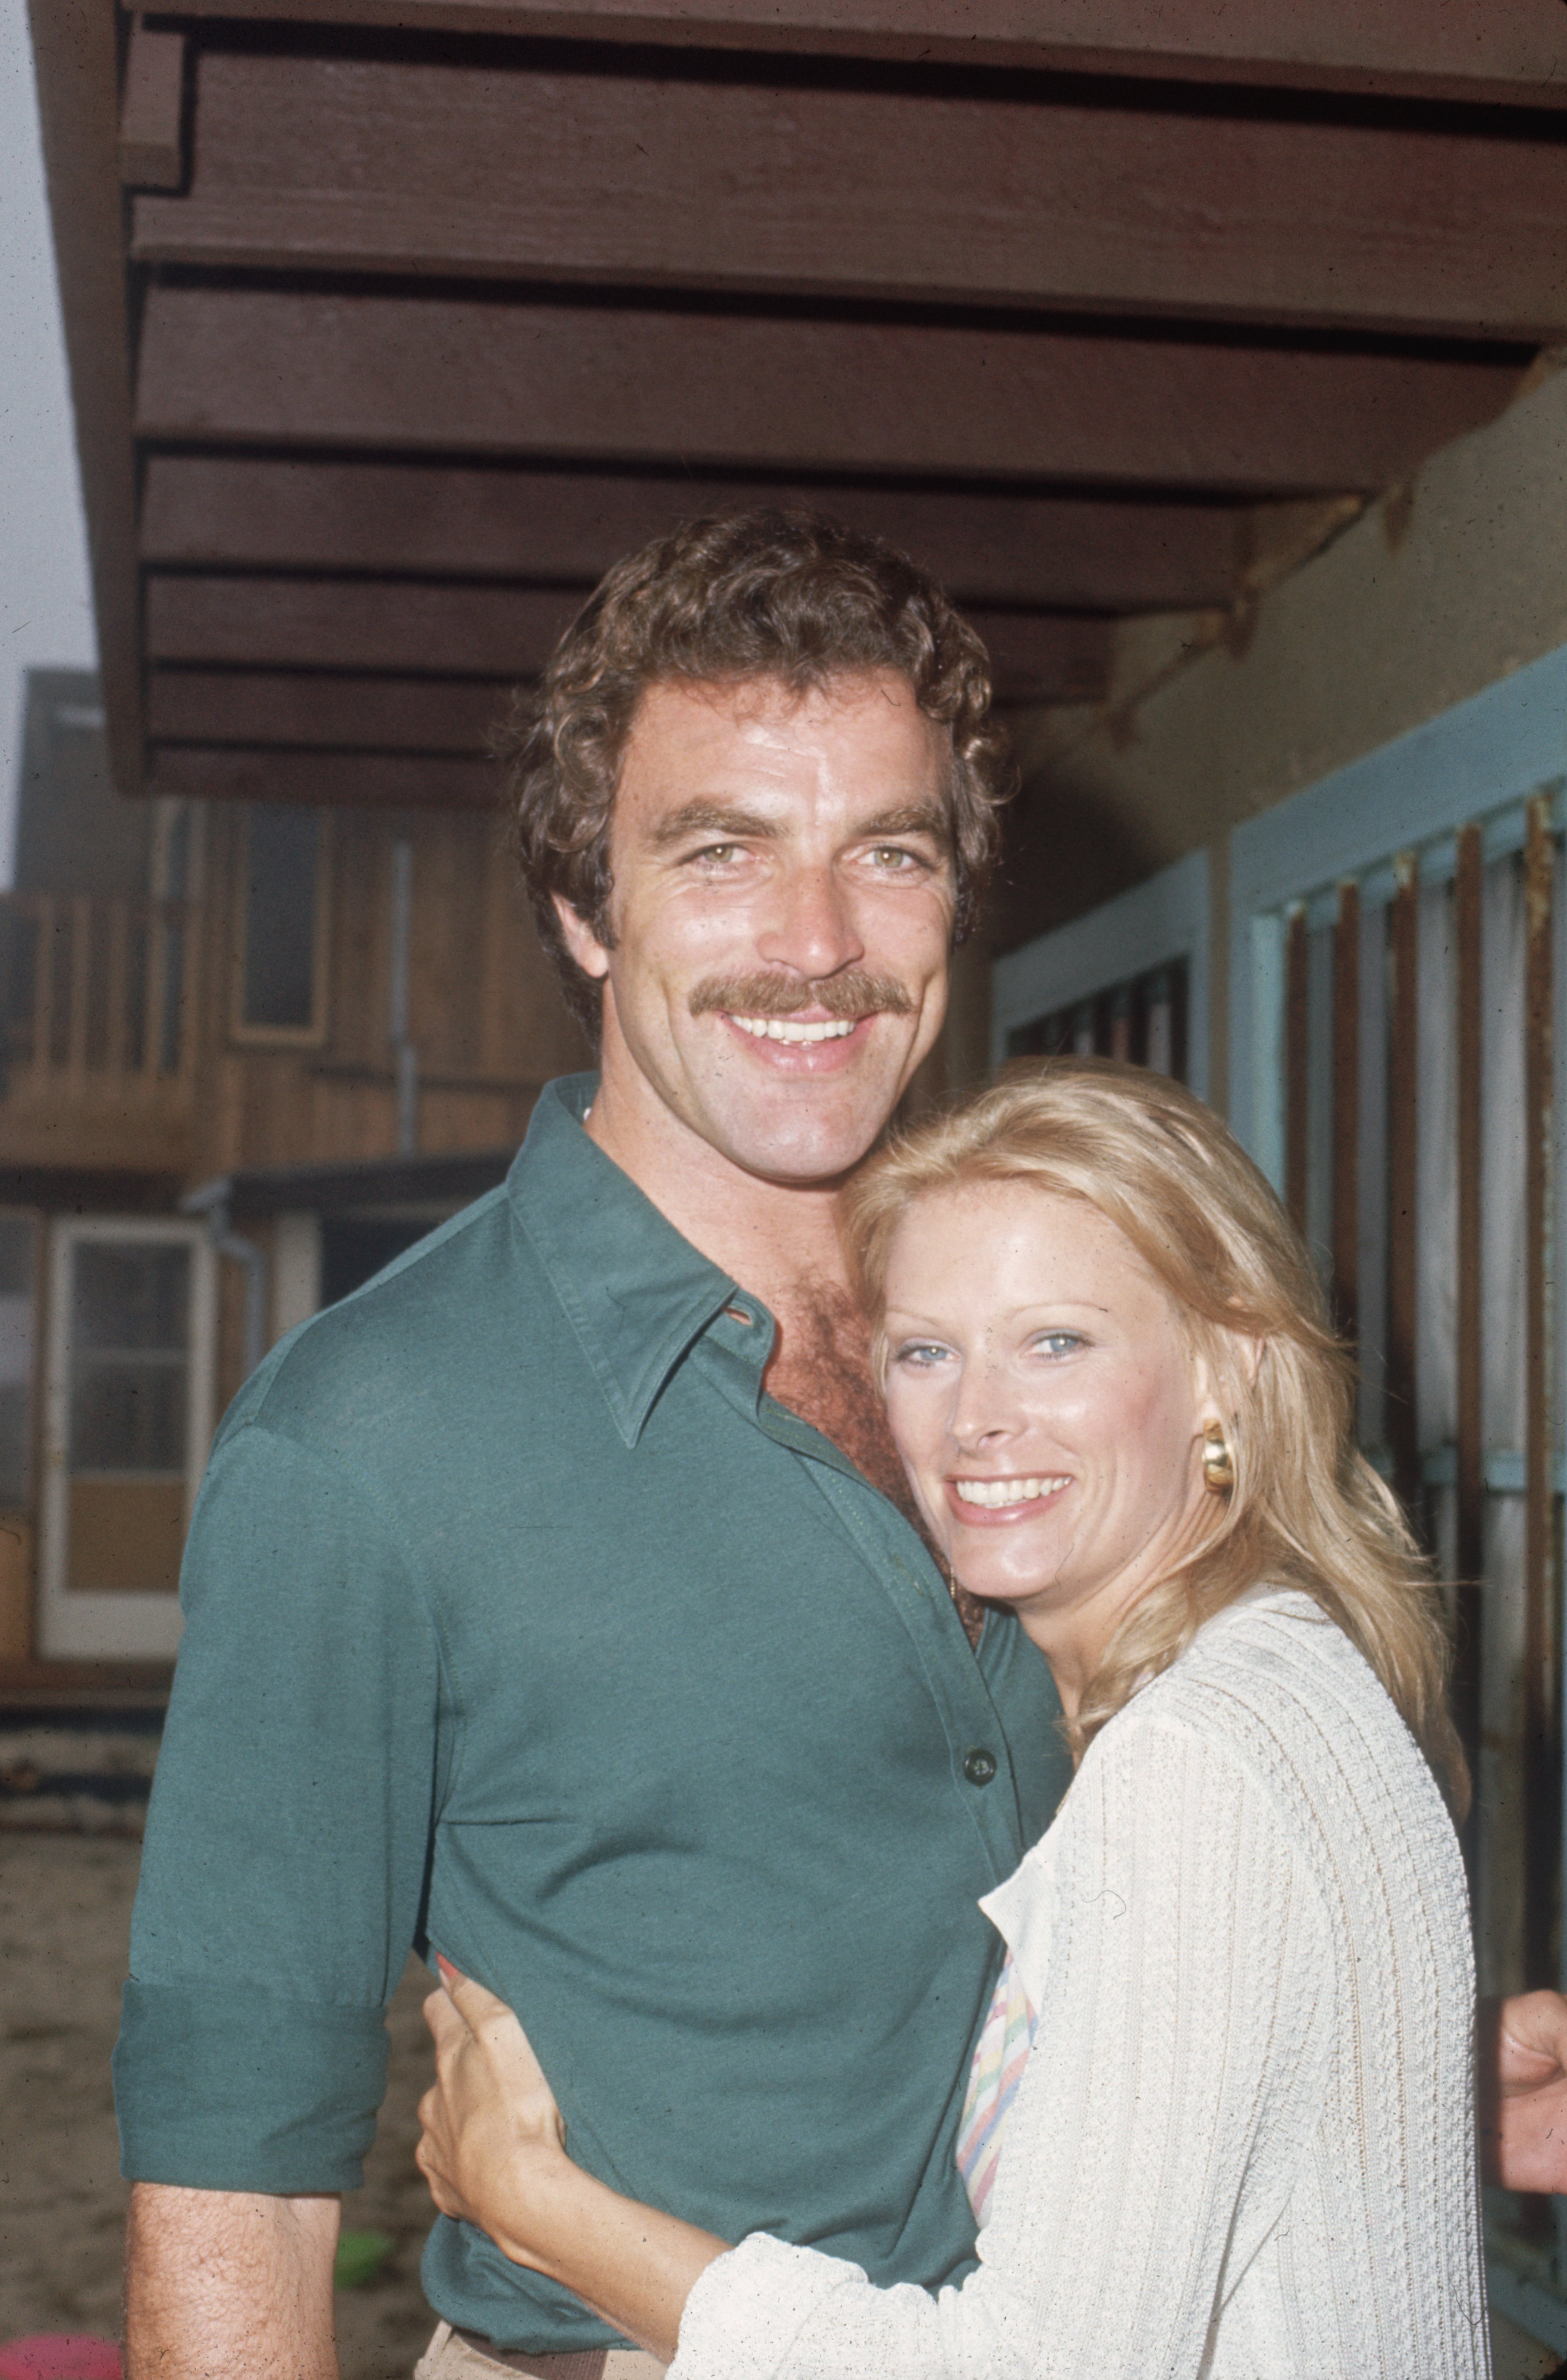 Tom Selleck and Jacqueline Ray at Robert Colbert's birthday party on October 4, 1975 | Source: Getty Images